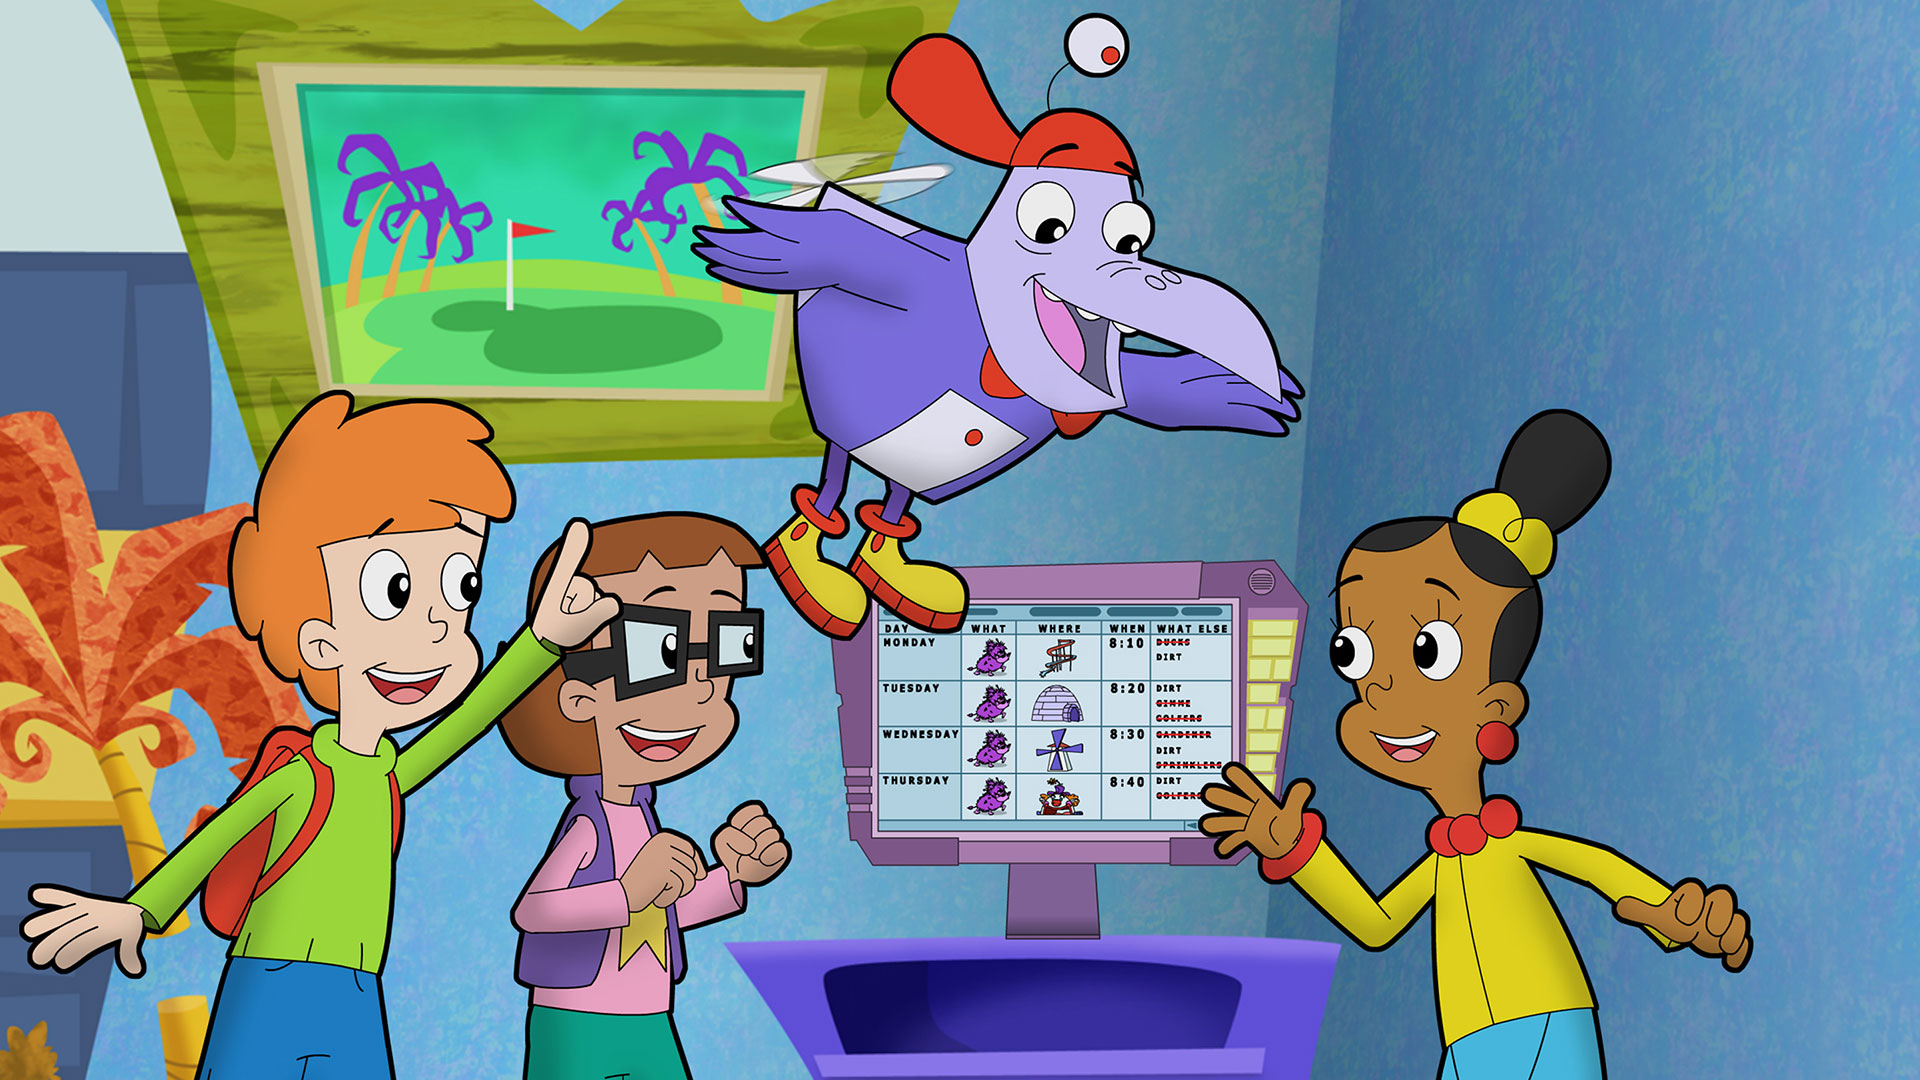 Cyberchase Wallpaper of This Cartoon!